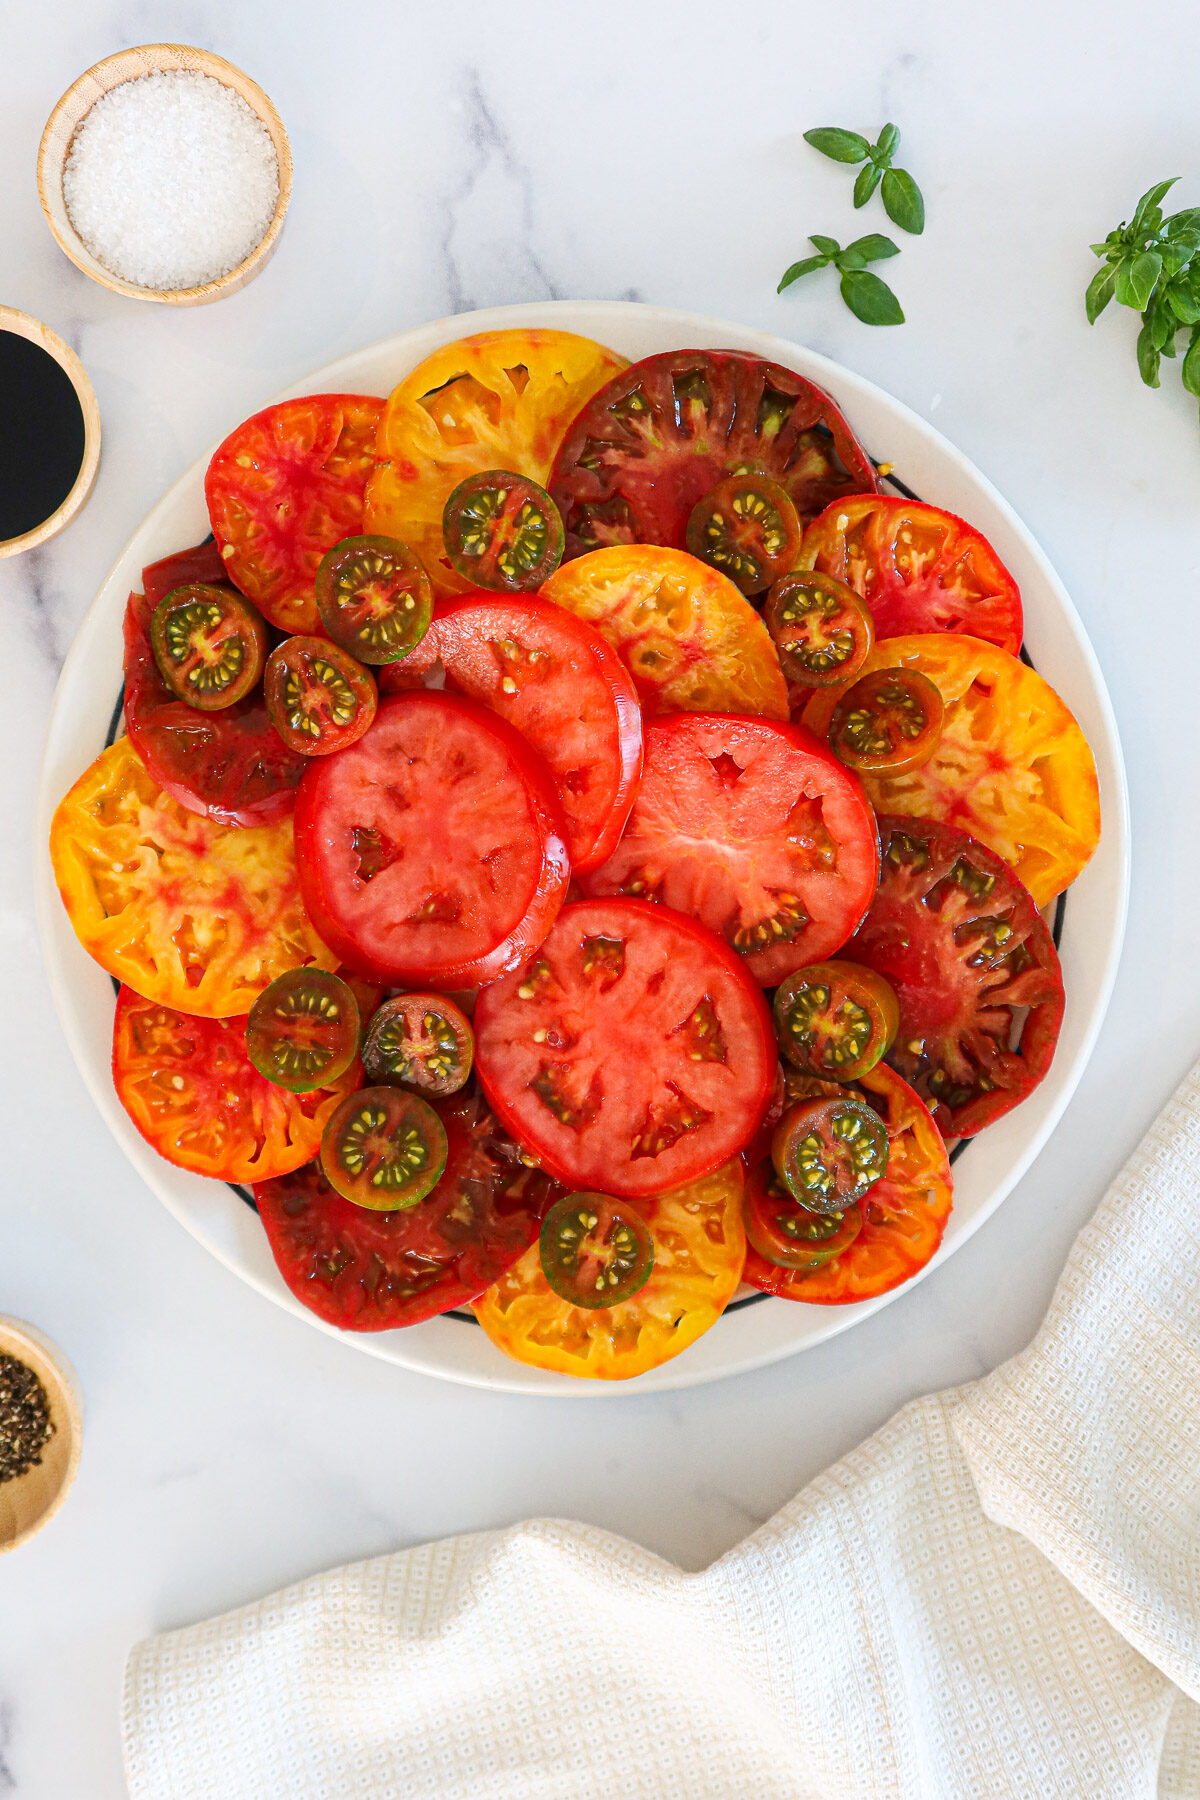 Heirloom tomato slices arranged neatly on a round plate.